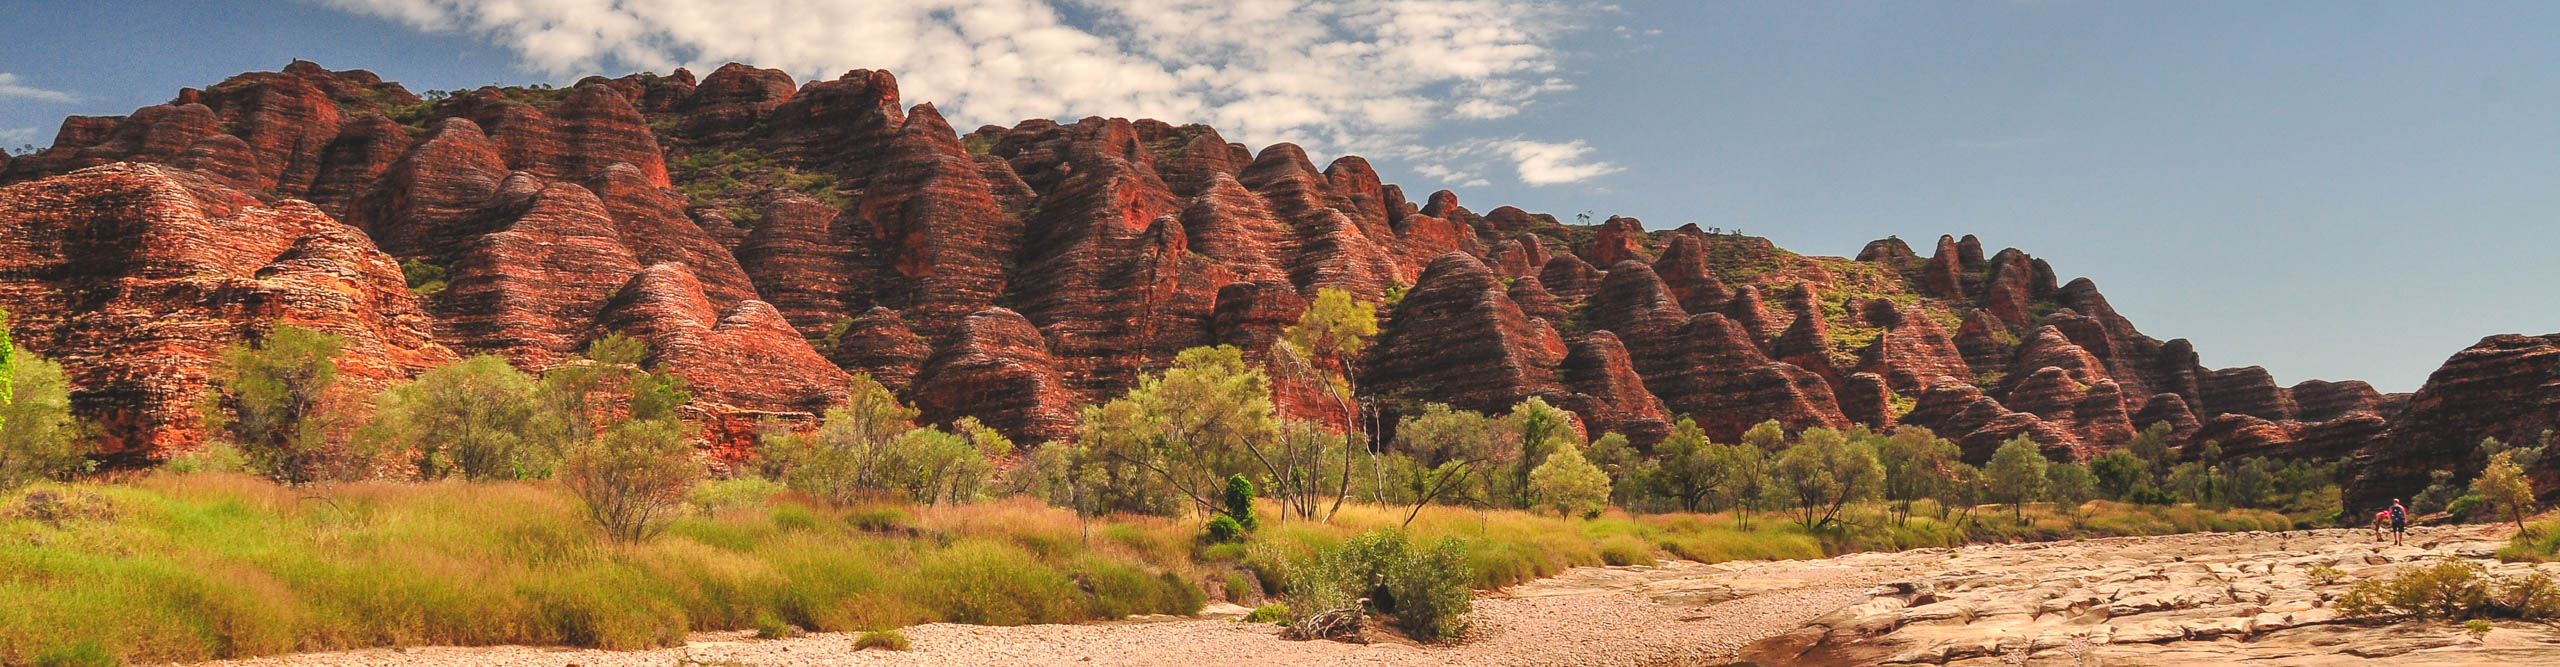 Red Bee Hive formations at the Bungle Bungles Ranges in Western Australia, on a clear sunny day